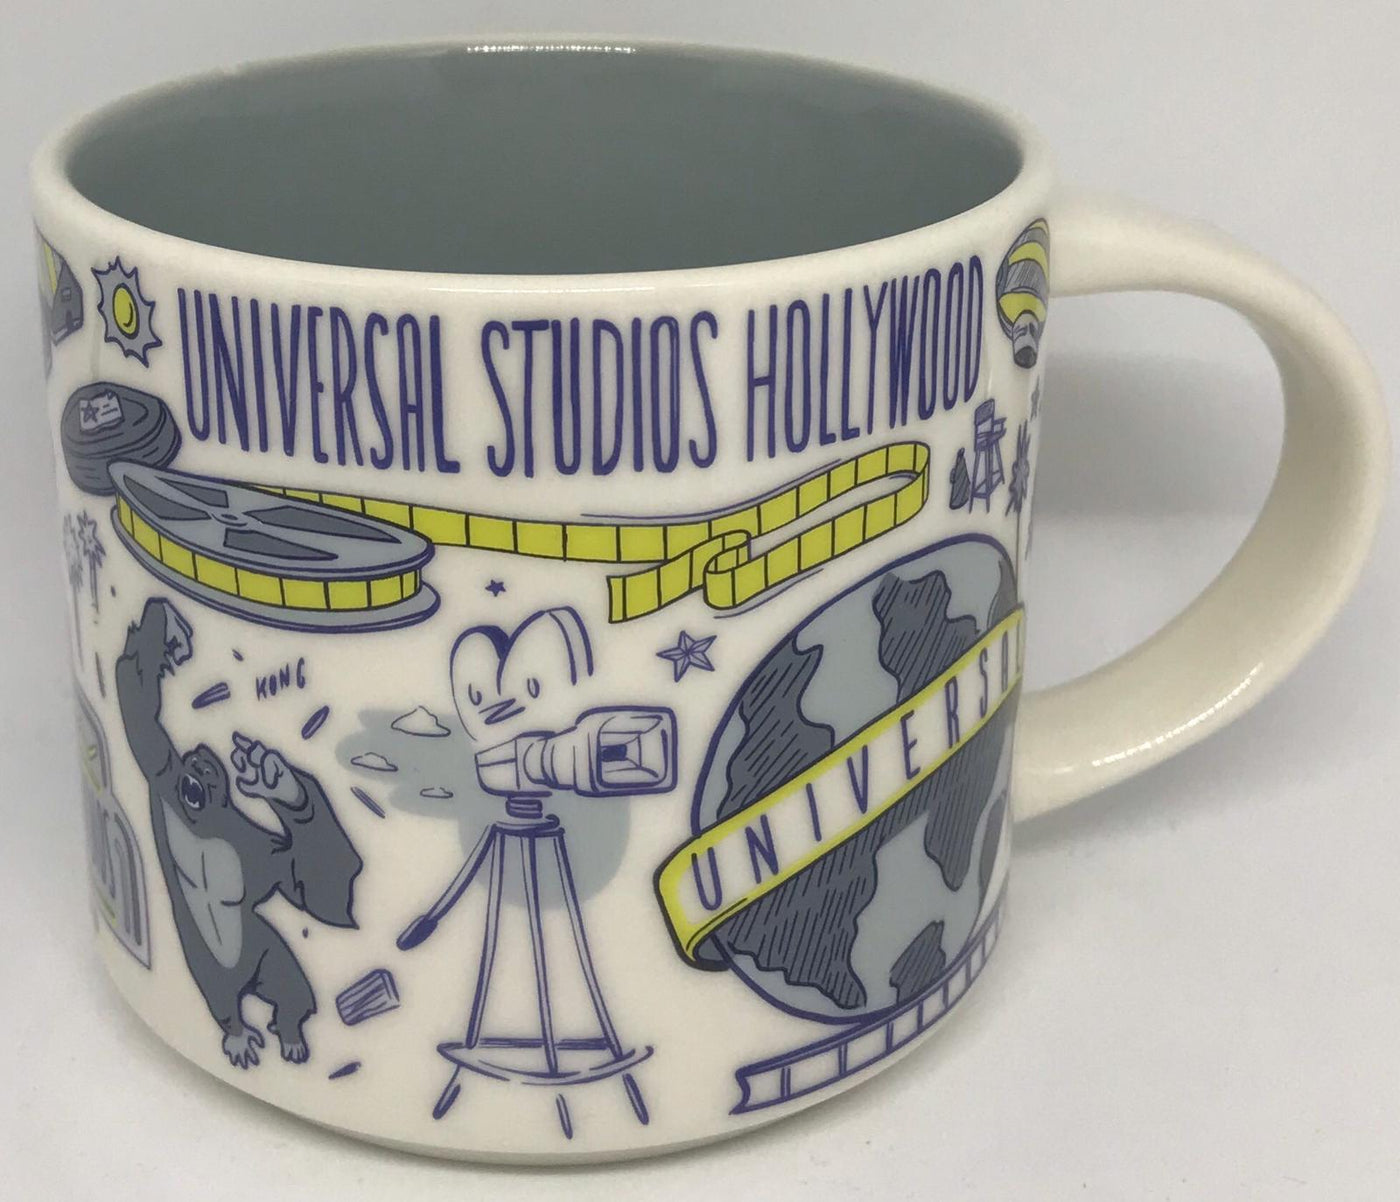 Starbucks Been There Series Coffee Mug Universal Studios Hollywood New with Box